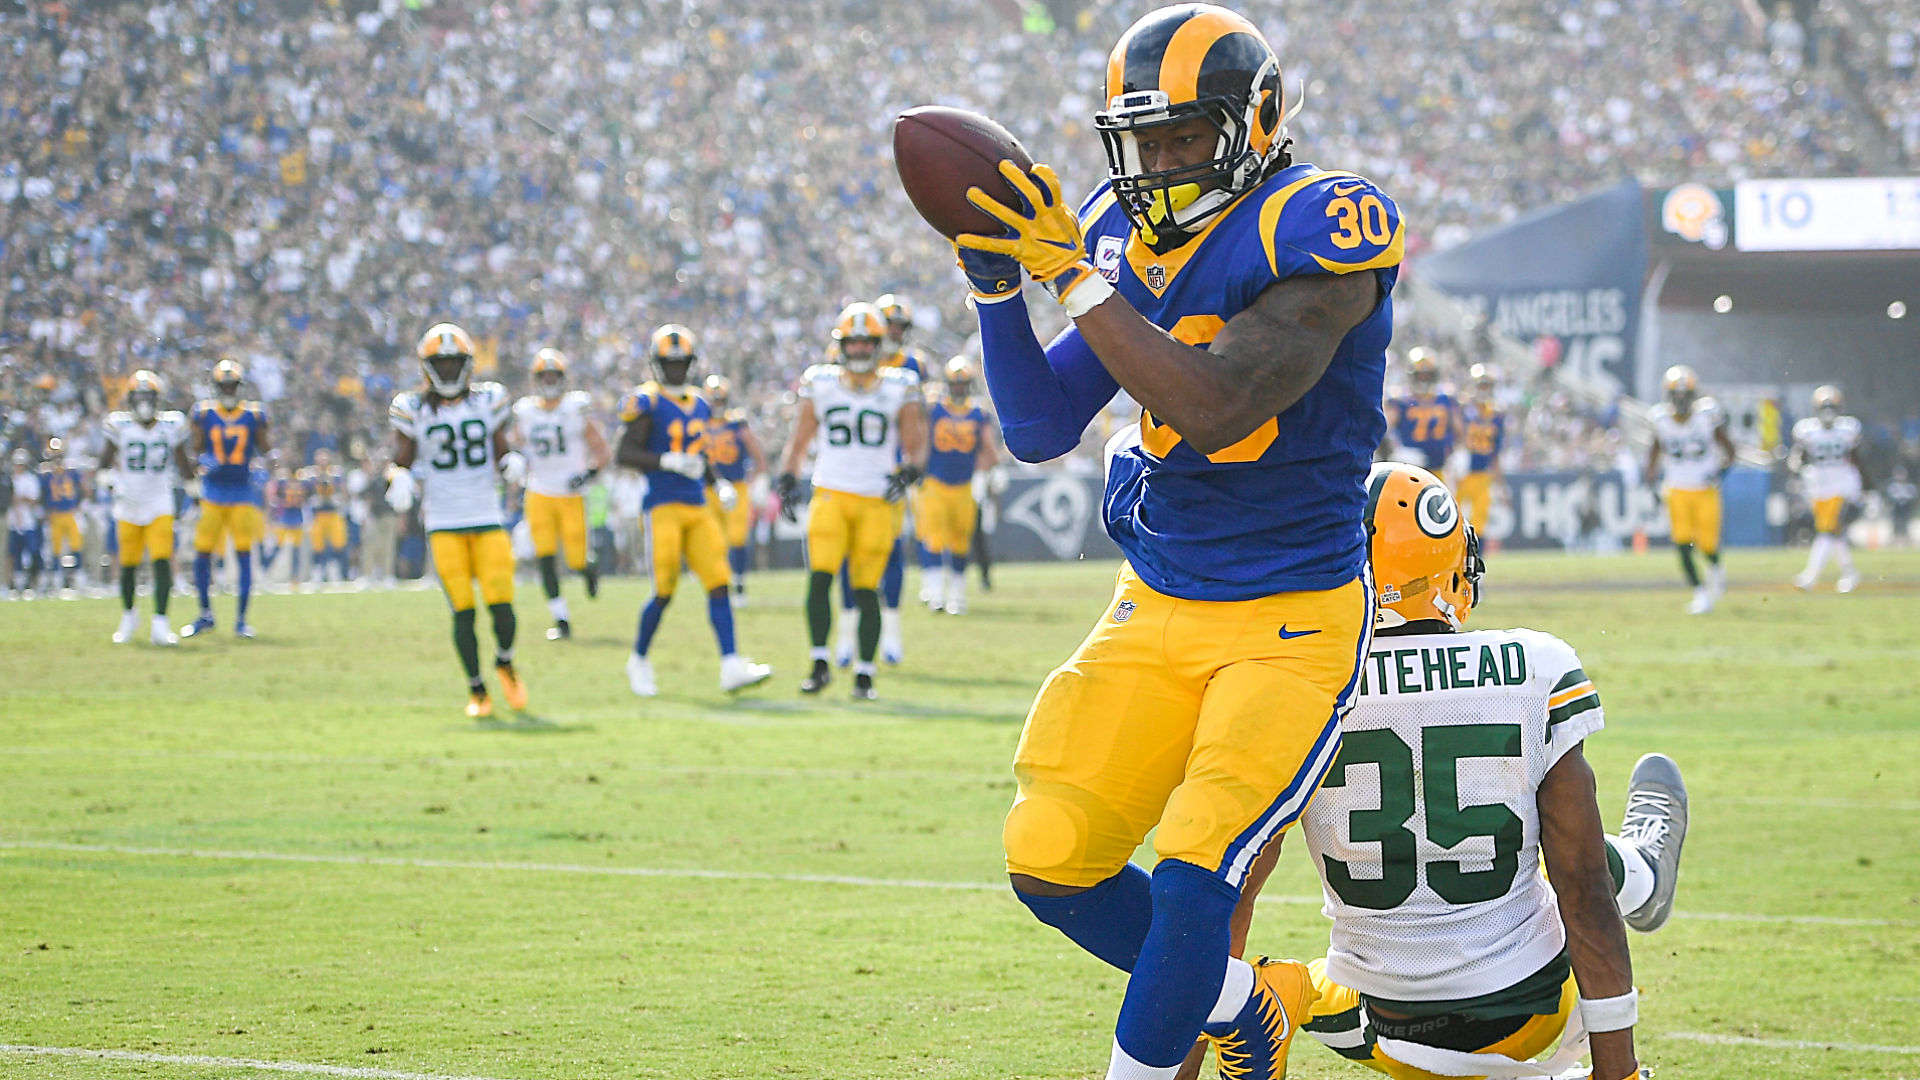 Packers vs. Rams: Score, results, highlights from Week 8 game in LA | Sporting News